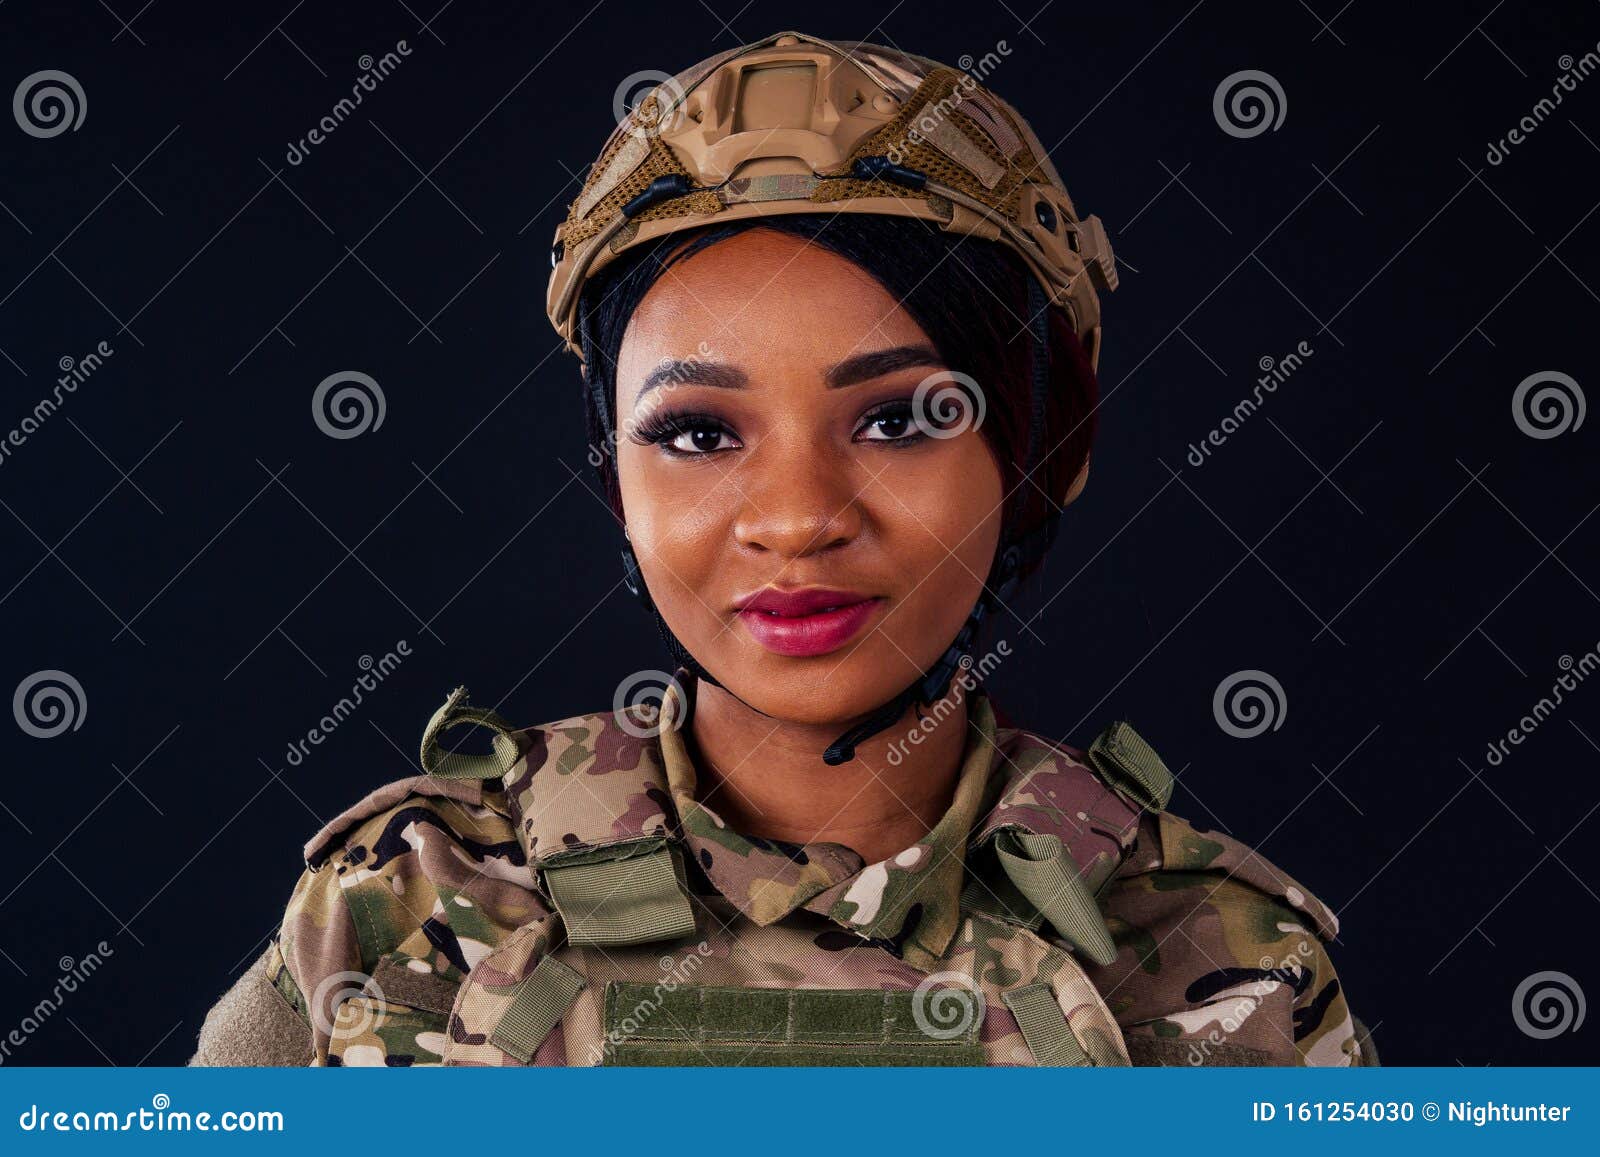 3,393 Black Female Soldier Stock Photos - Free & Royalty-Free